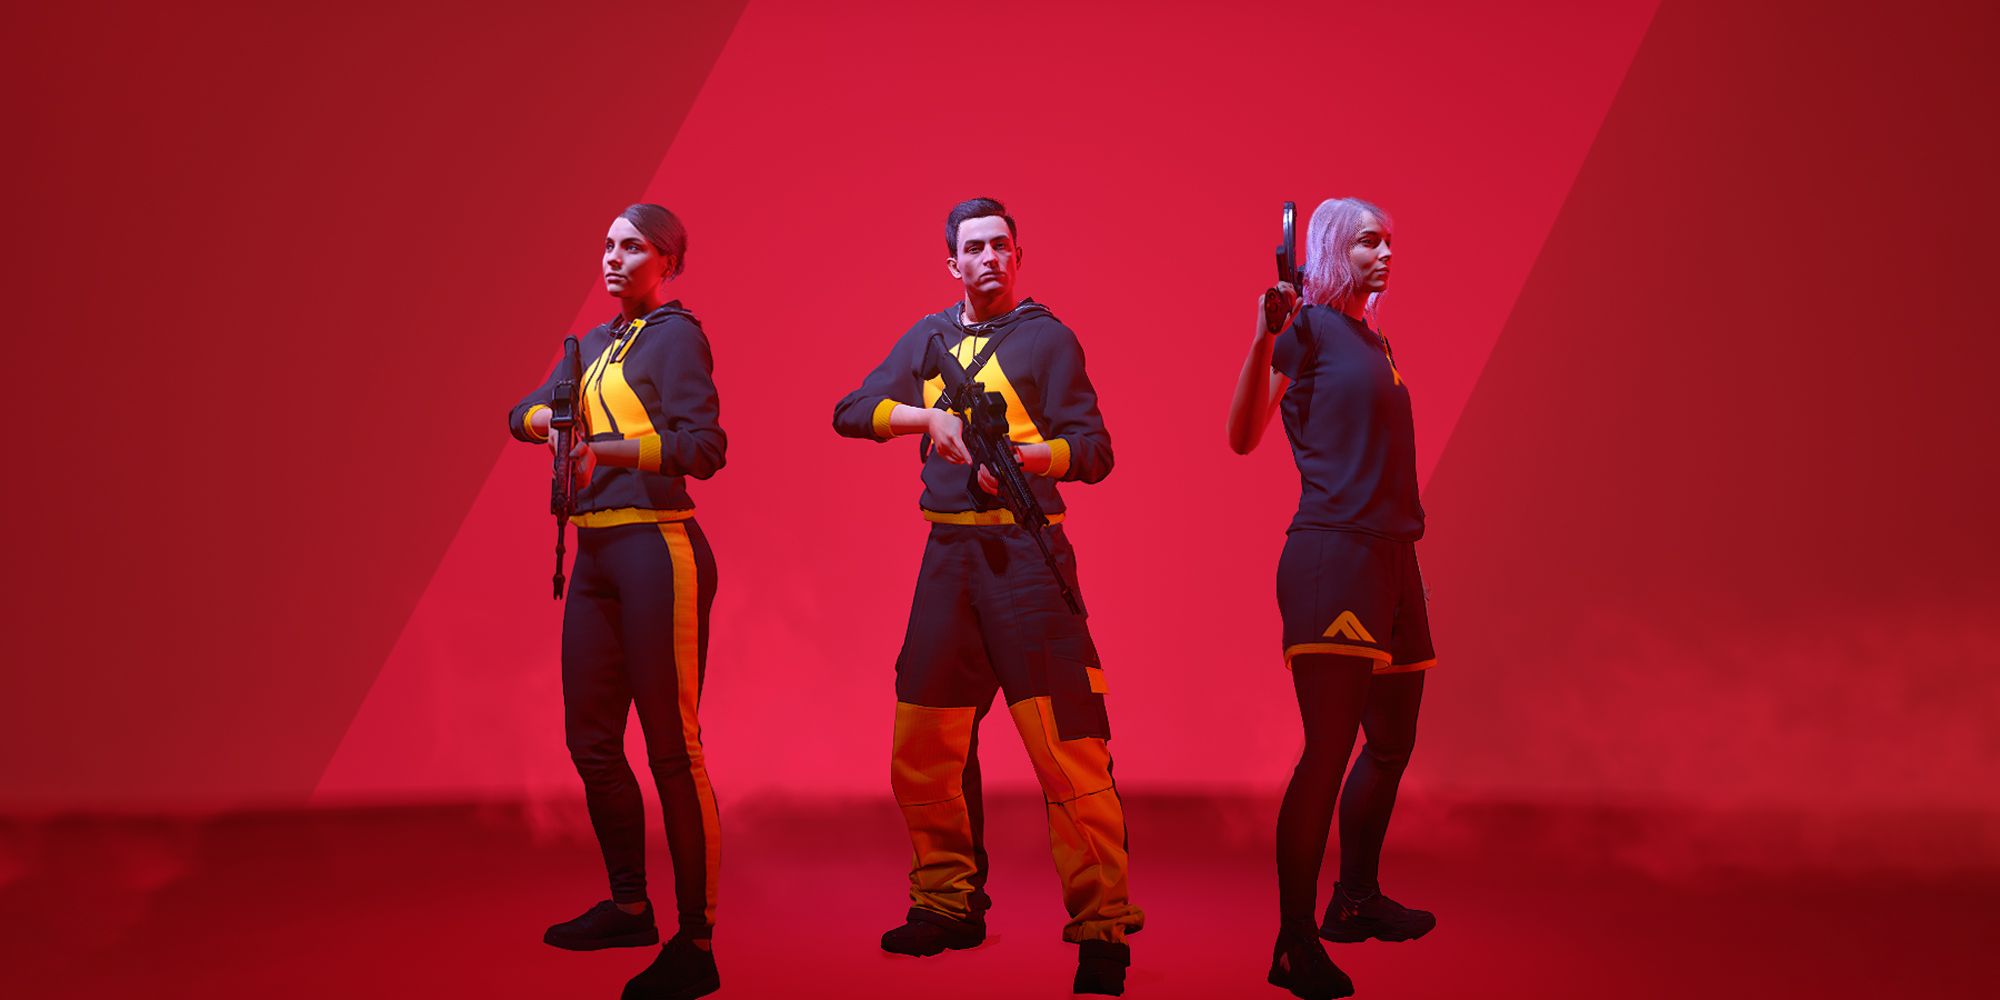 The Finals' Three Medium Build Characters (One Male, Two Females) Holding Guns Sanding With Red Background